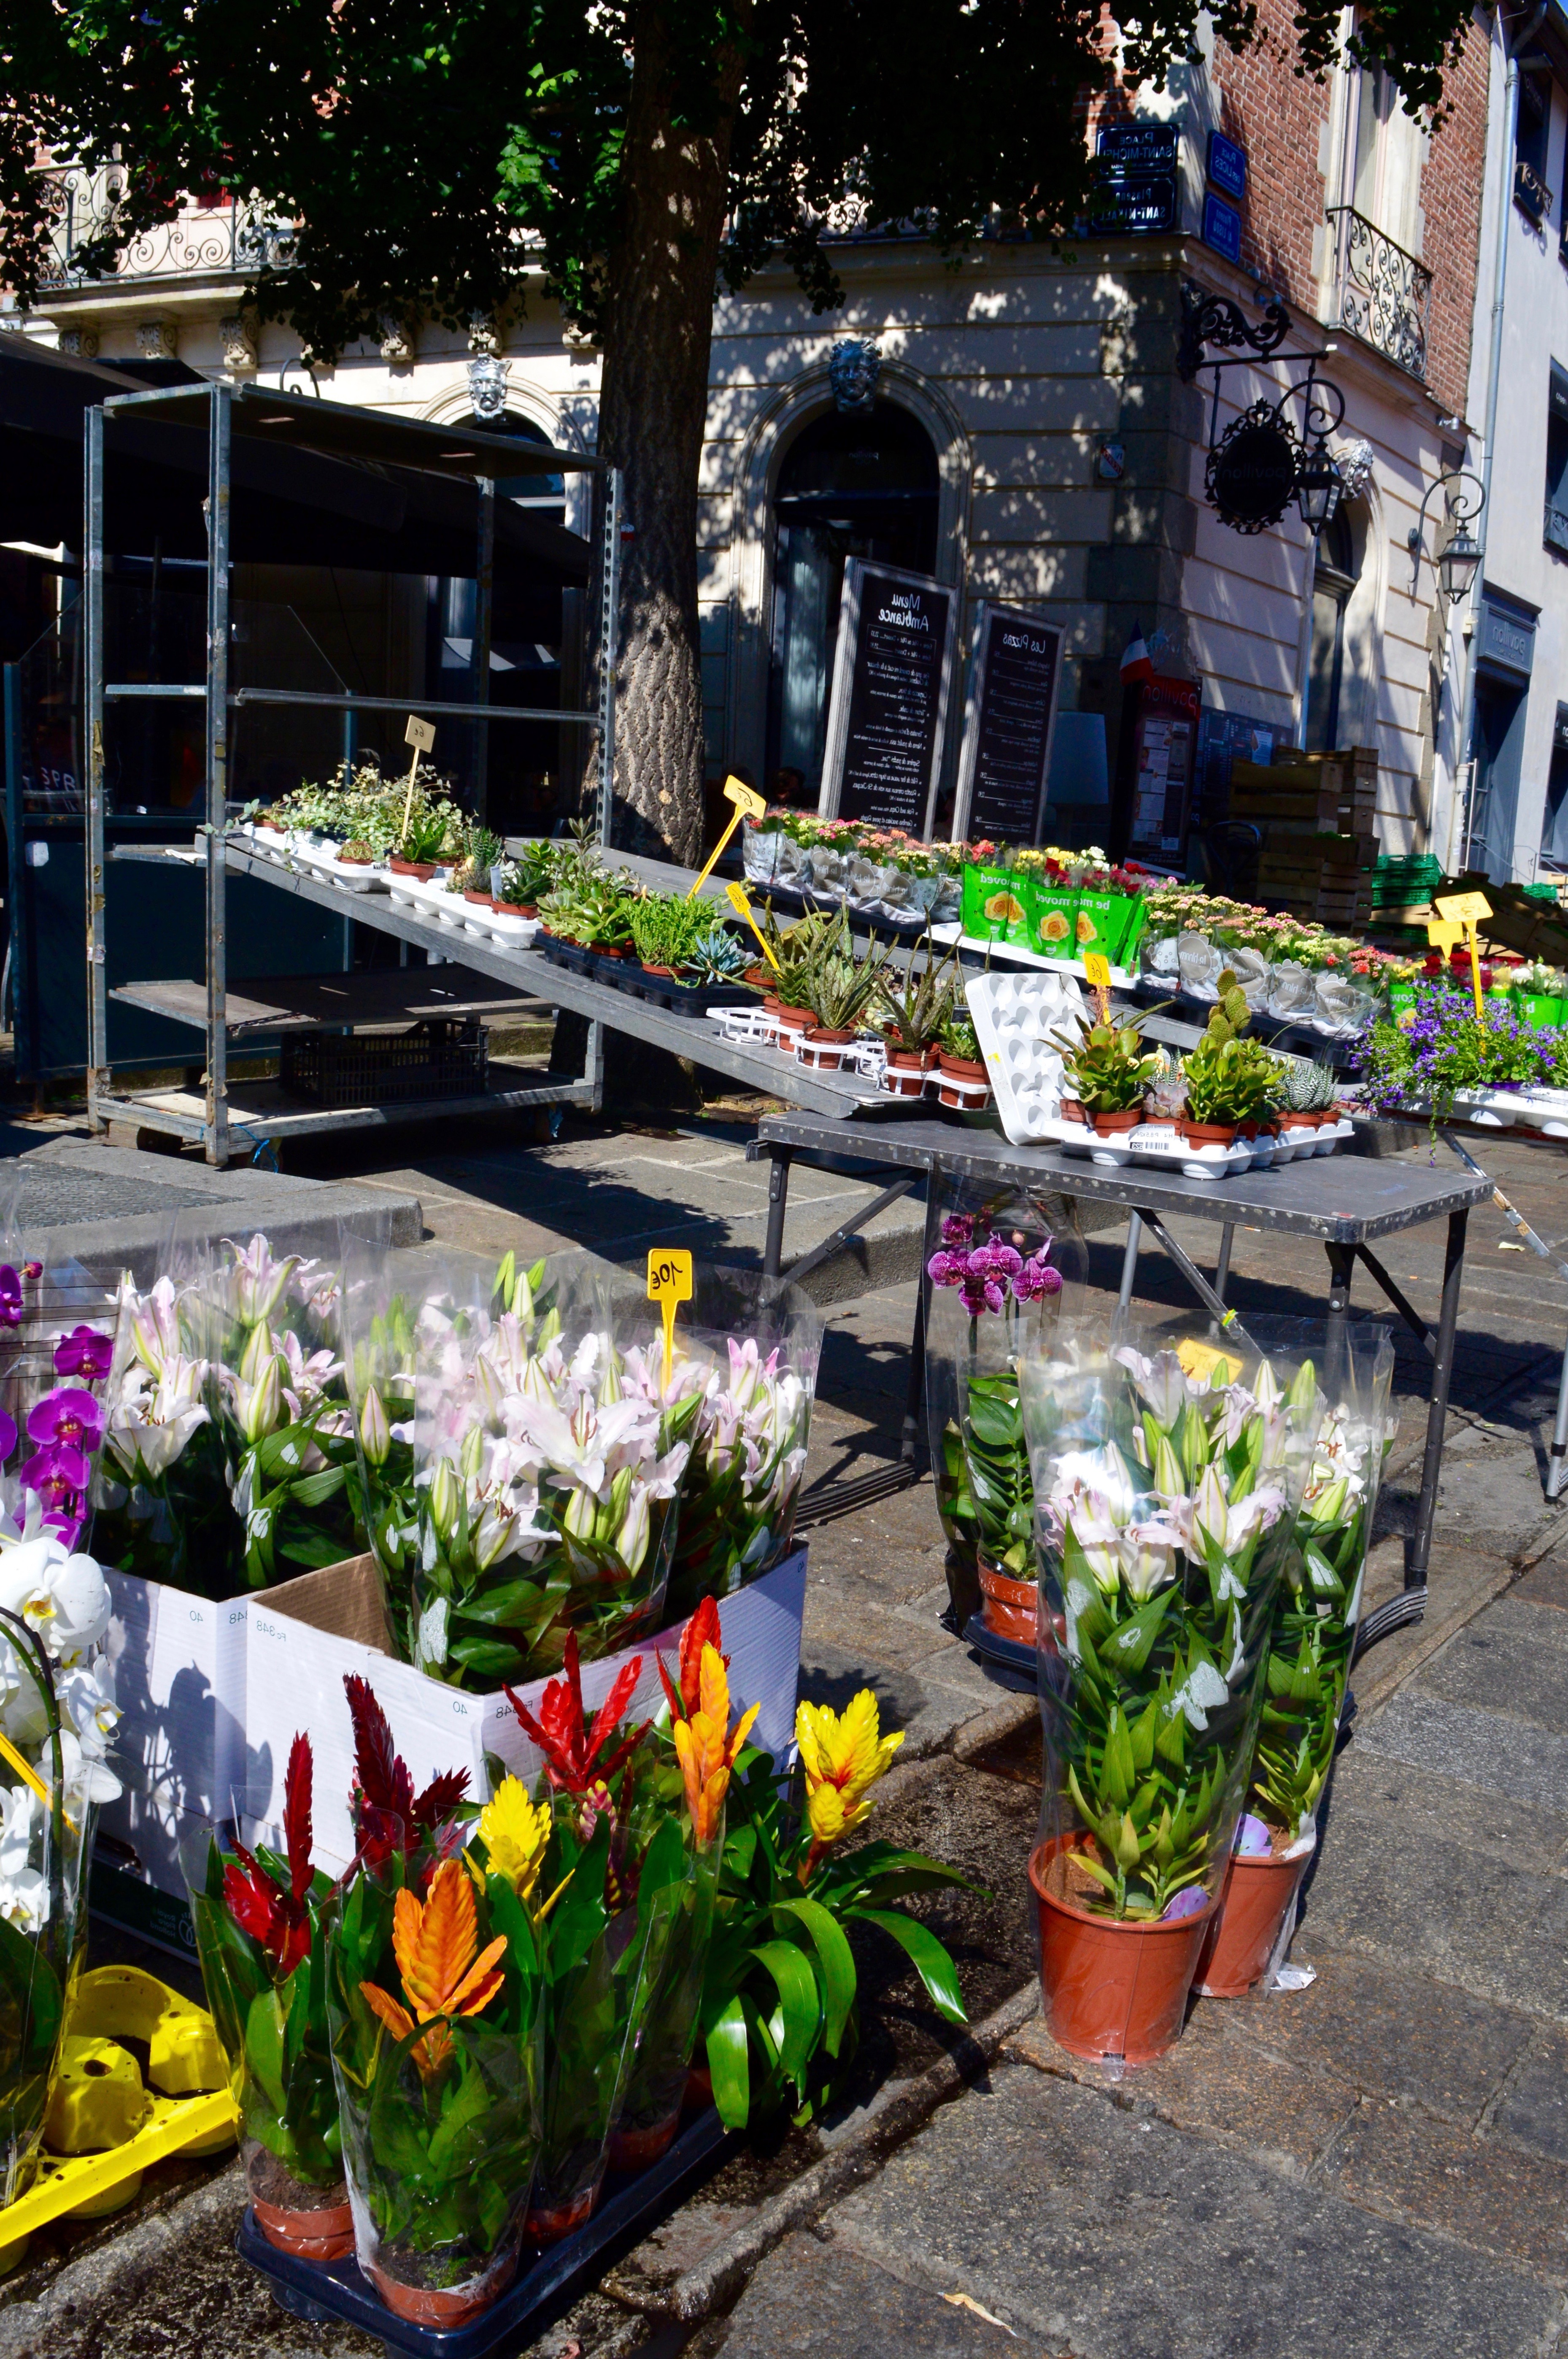 flowers on sale at outside market